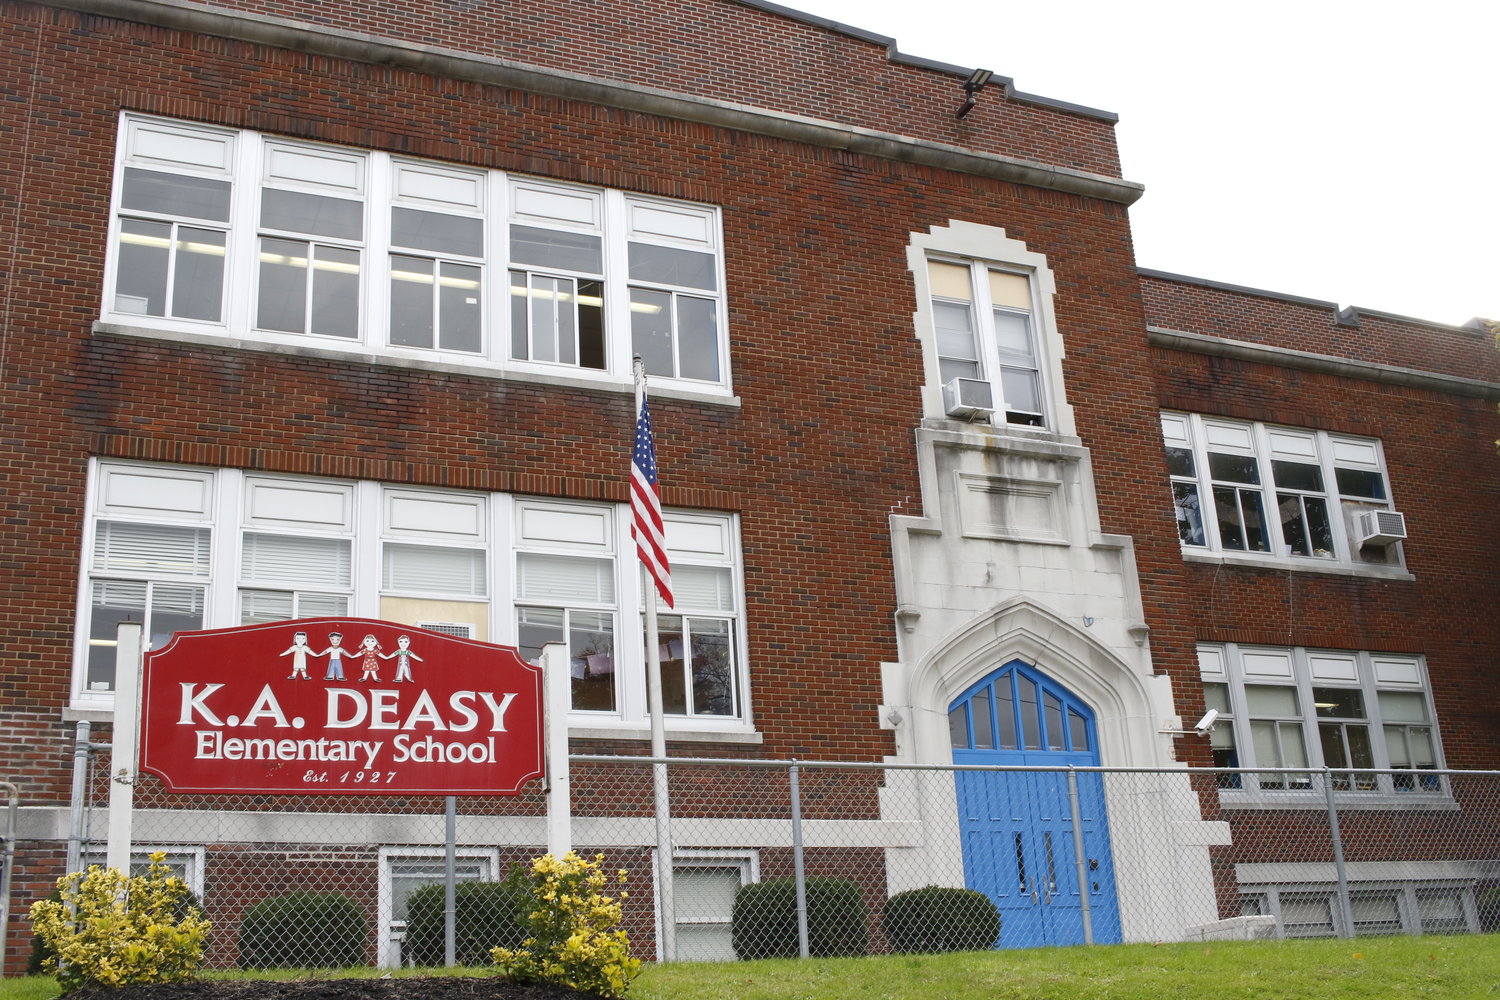 A crossing guard, who is in critical condition, was hit by a car near Deasy Elementary School in Glen Cove on Thursday.